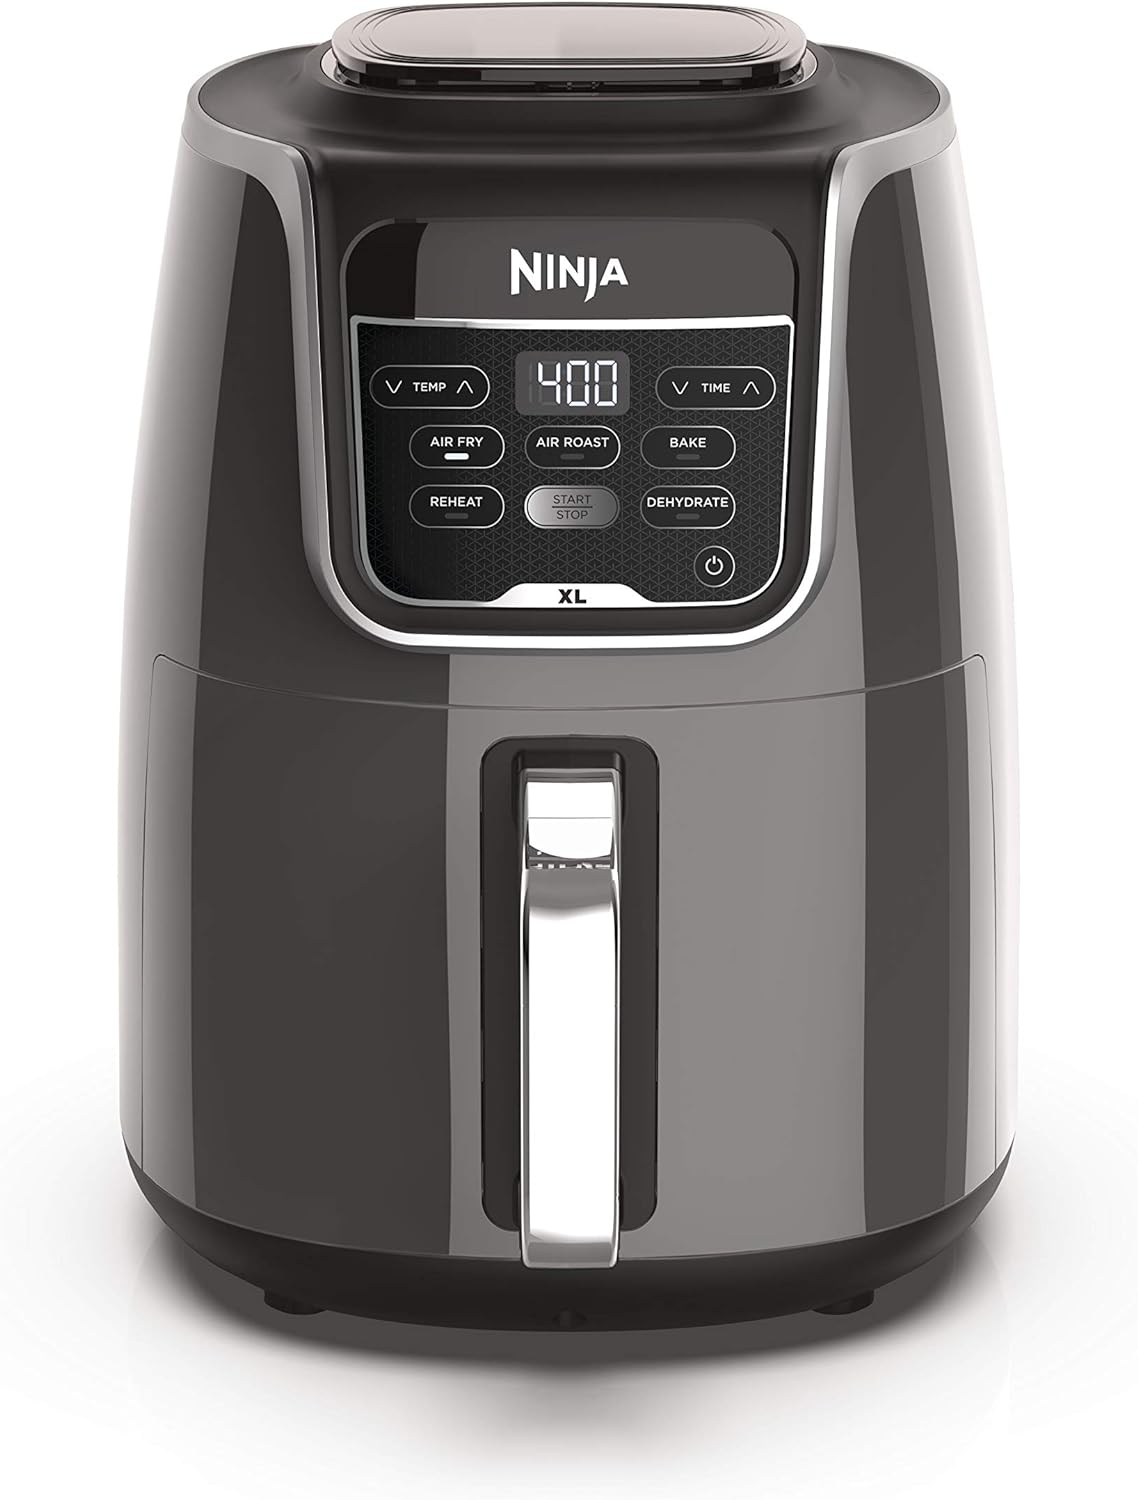 Ninja AF150AMZ Air Fryer XL, 5.5 Qt. Capacity that can Air Fry, Air Roast, Bake, Reheat  Dehydrate, with Dishwasher Safe, Nonstick Basket  Crisper Plate and a Chef-Inspired Recipe Guide, Grey